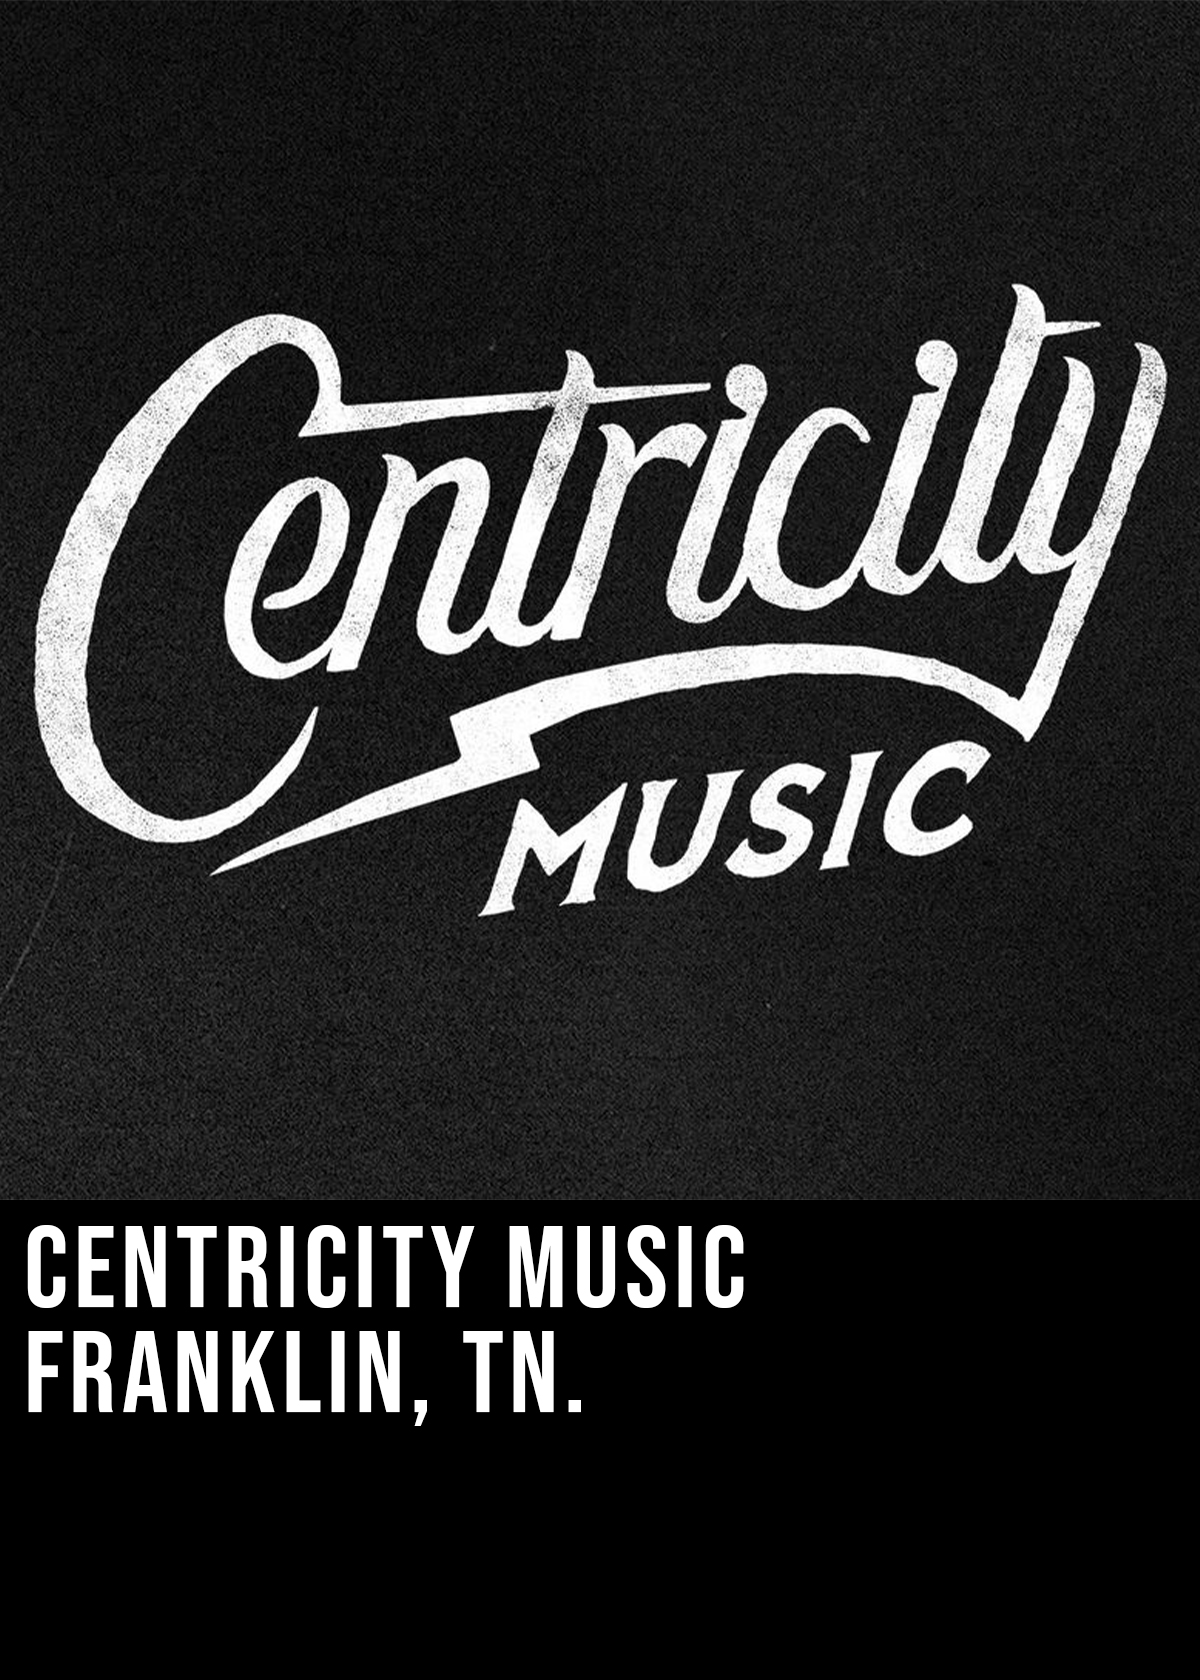 CENTRICITY MUSIC DON EANES UNSPOKEN FRANKLIN TENNESSEE